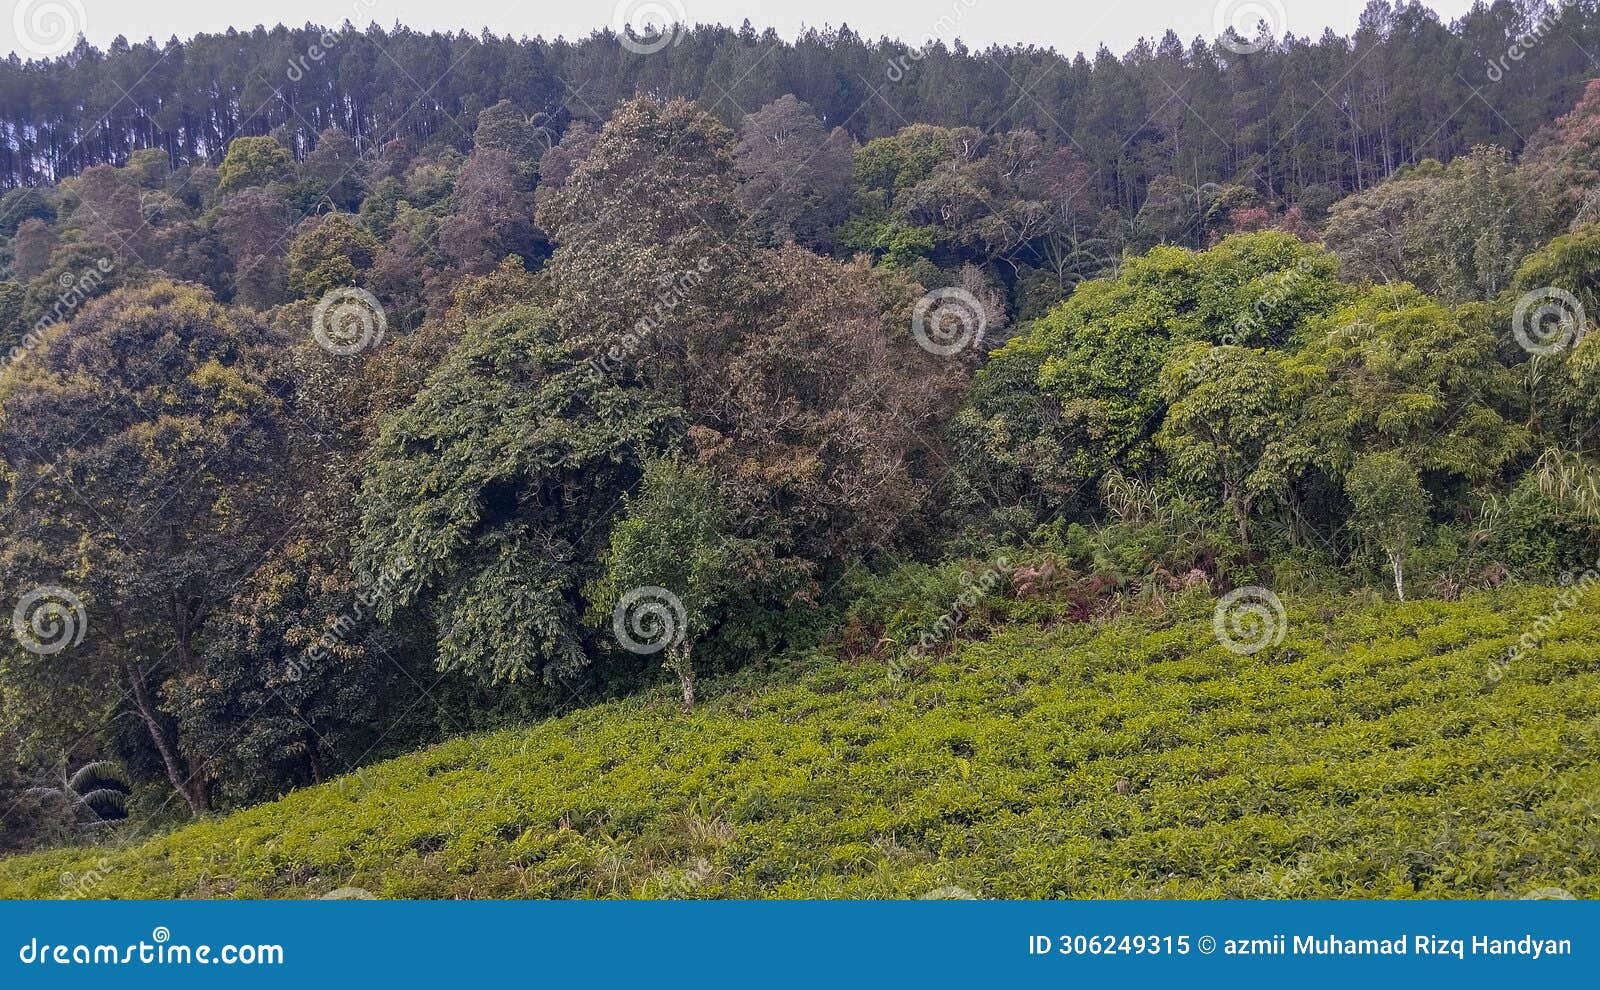 forest view taken from a tea plantation in lembang